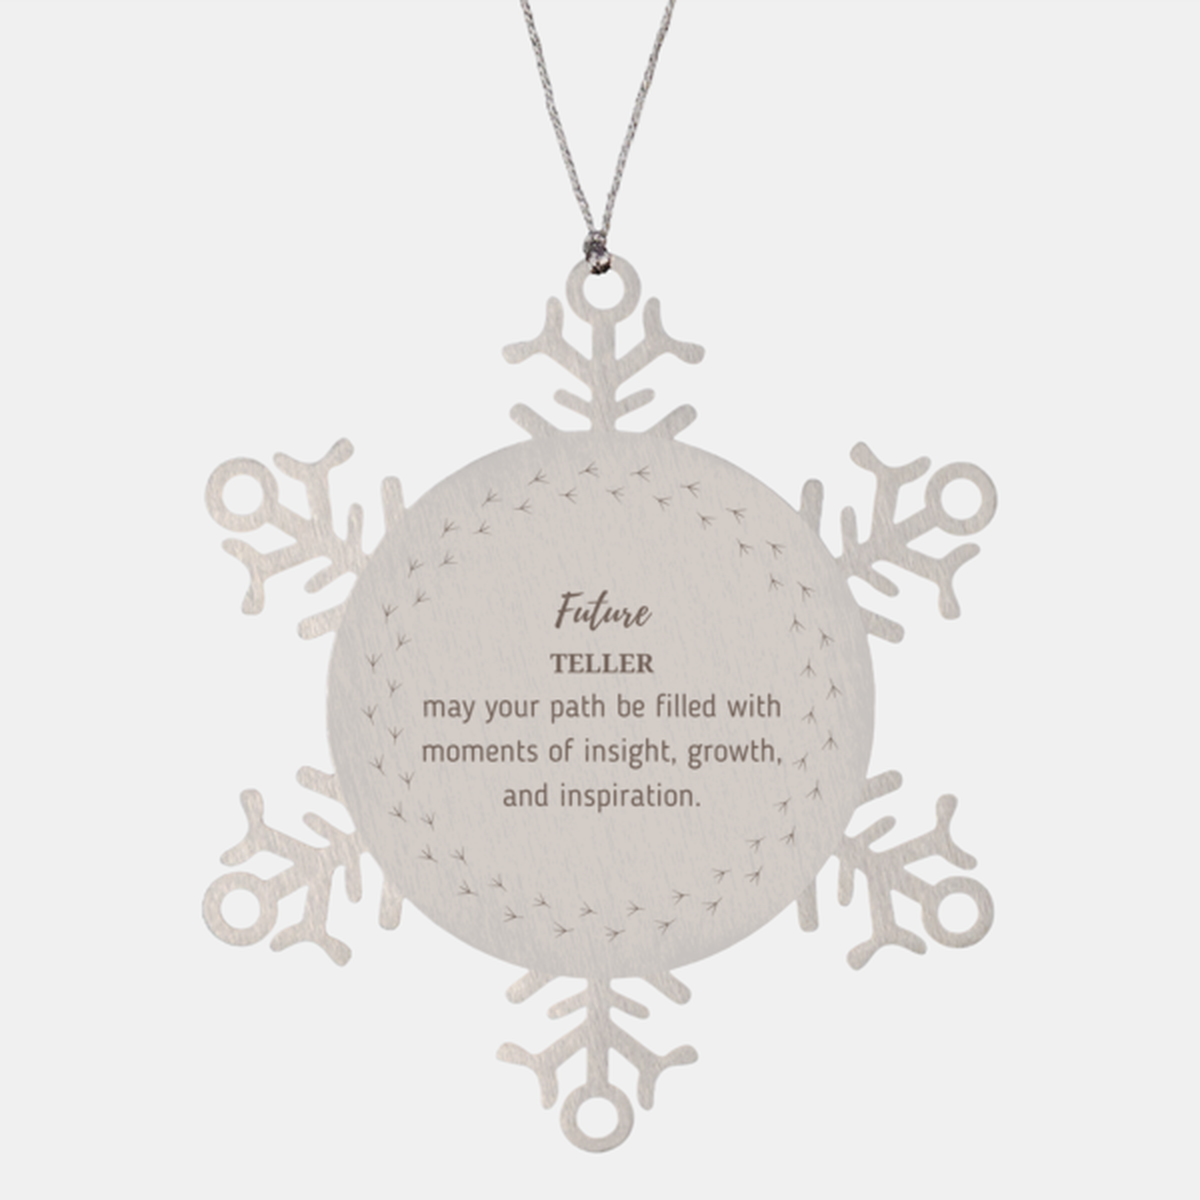 Future Teller Gifts, May your path be filled with moments of insight, Graduation Gifts for New Teller, Christmas Unique Snowflake Ornament For Men, Women, Friends